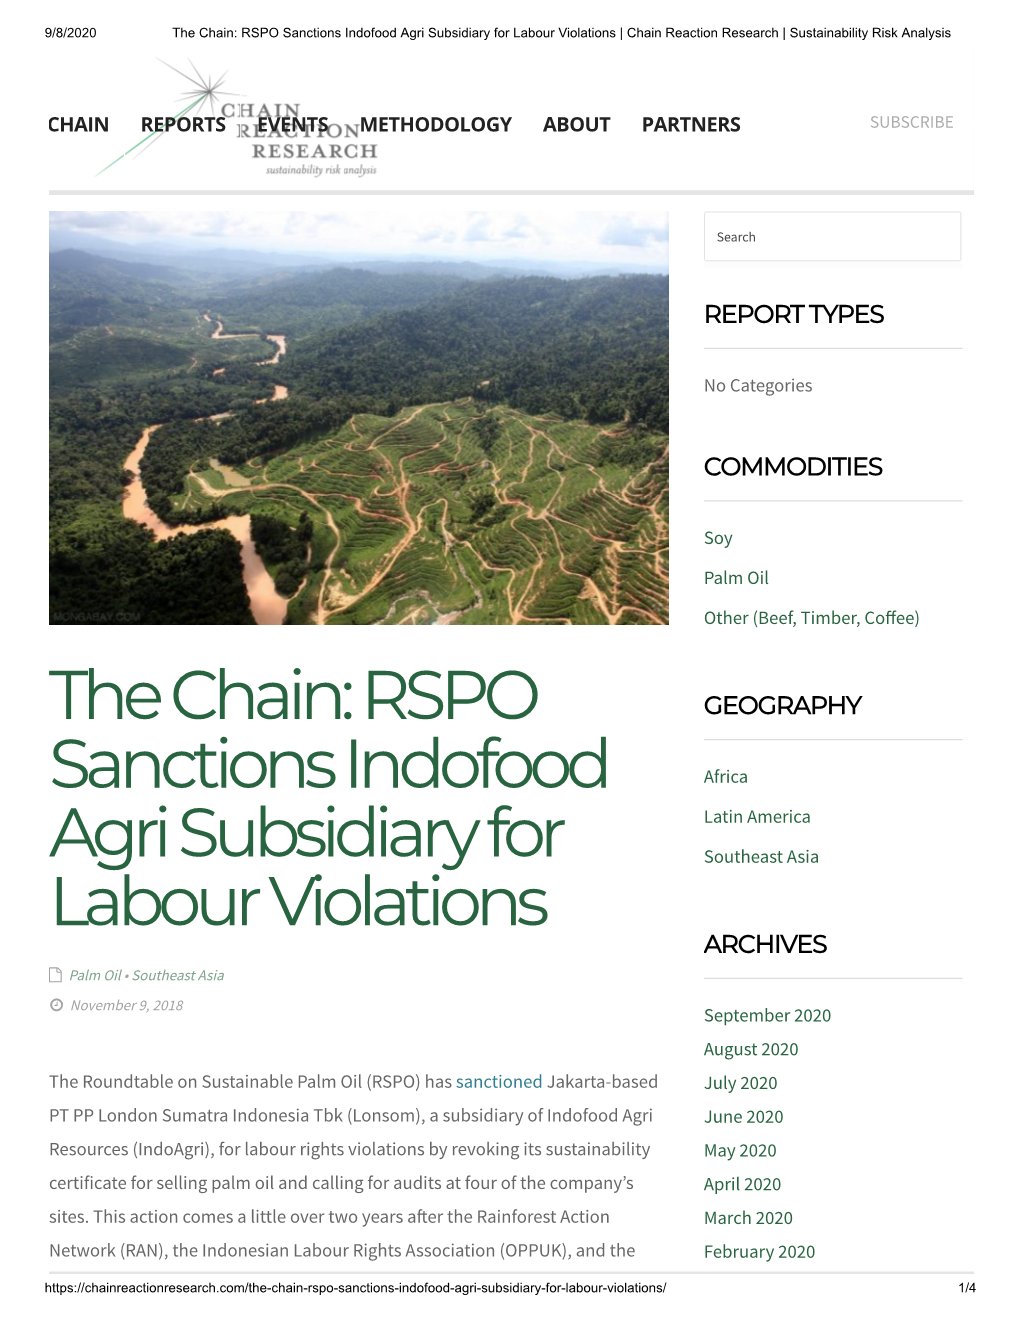 RSPO Sanctions Indofood Agri Subsidiary for Labour Violations | Chain Reaction Research | Sustainability Risk Analysis